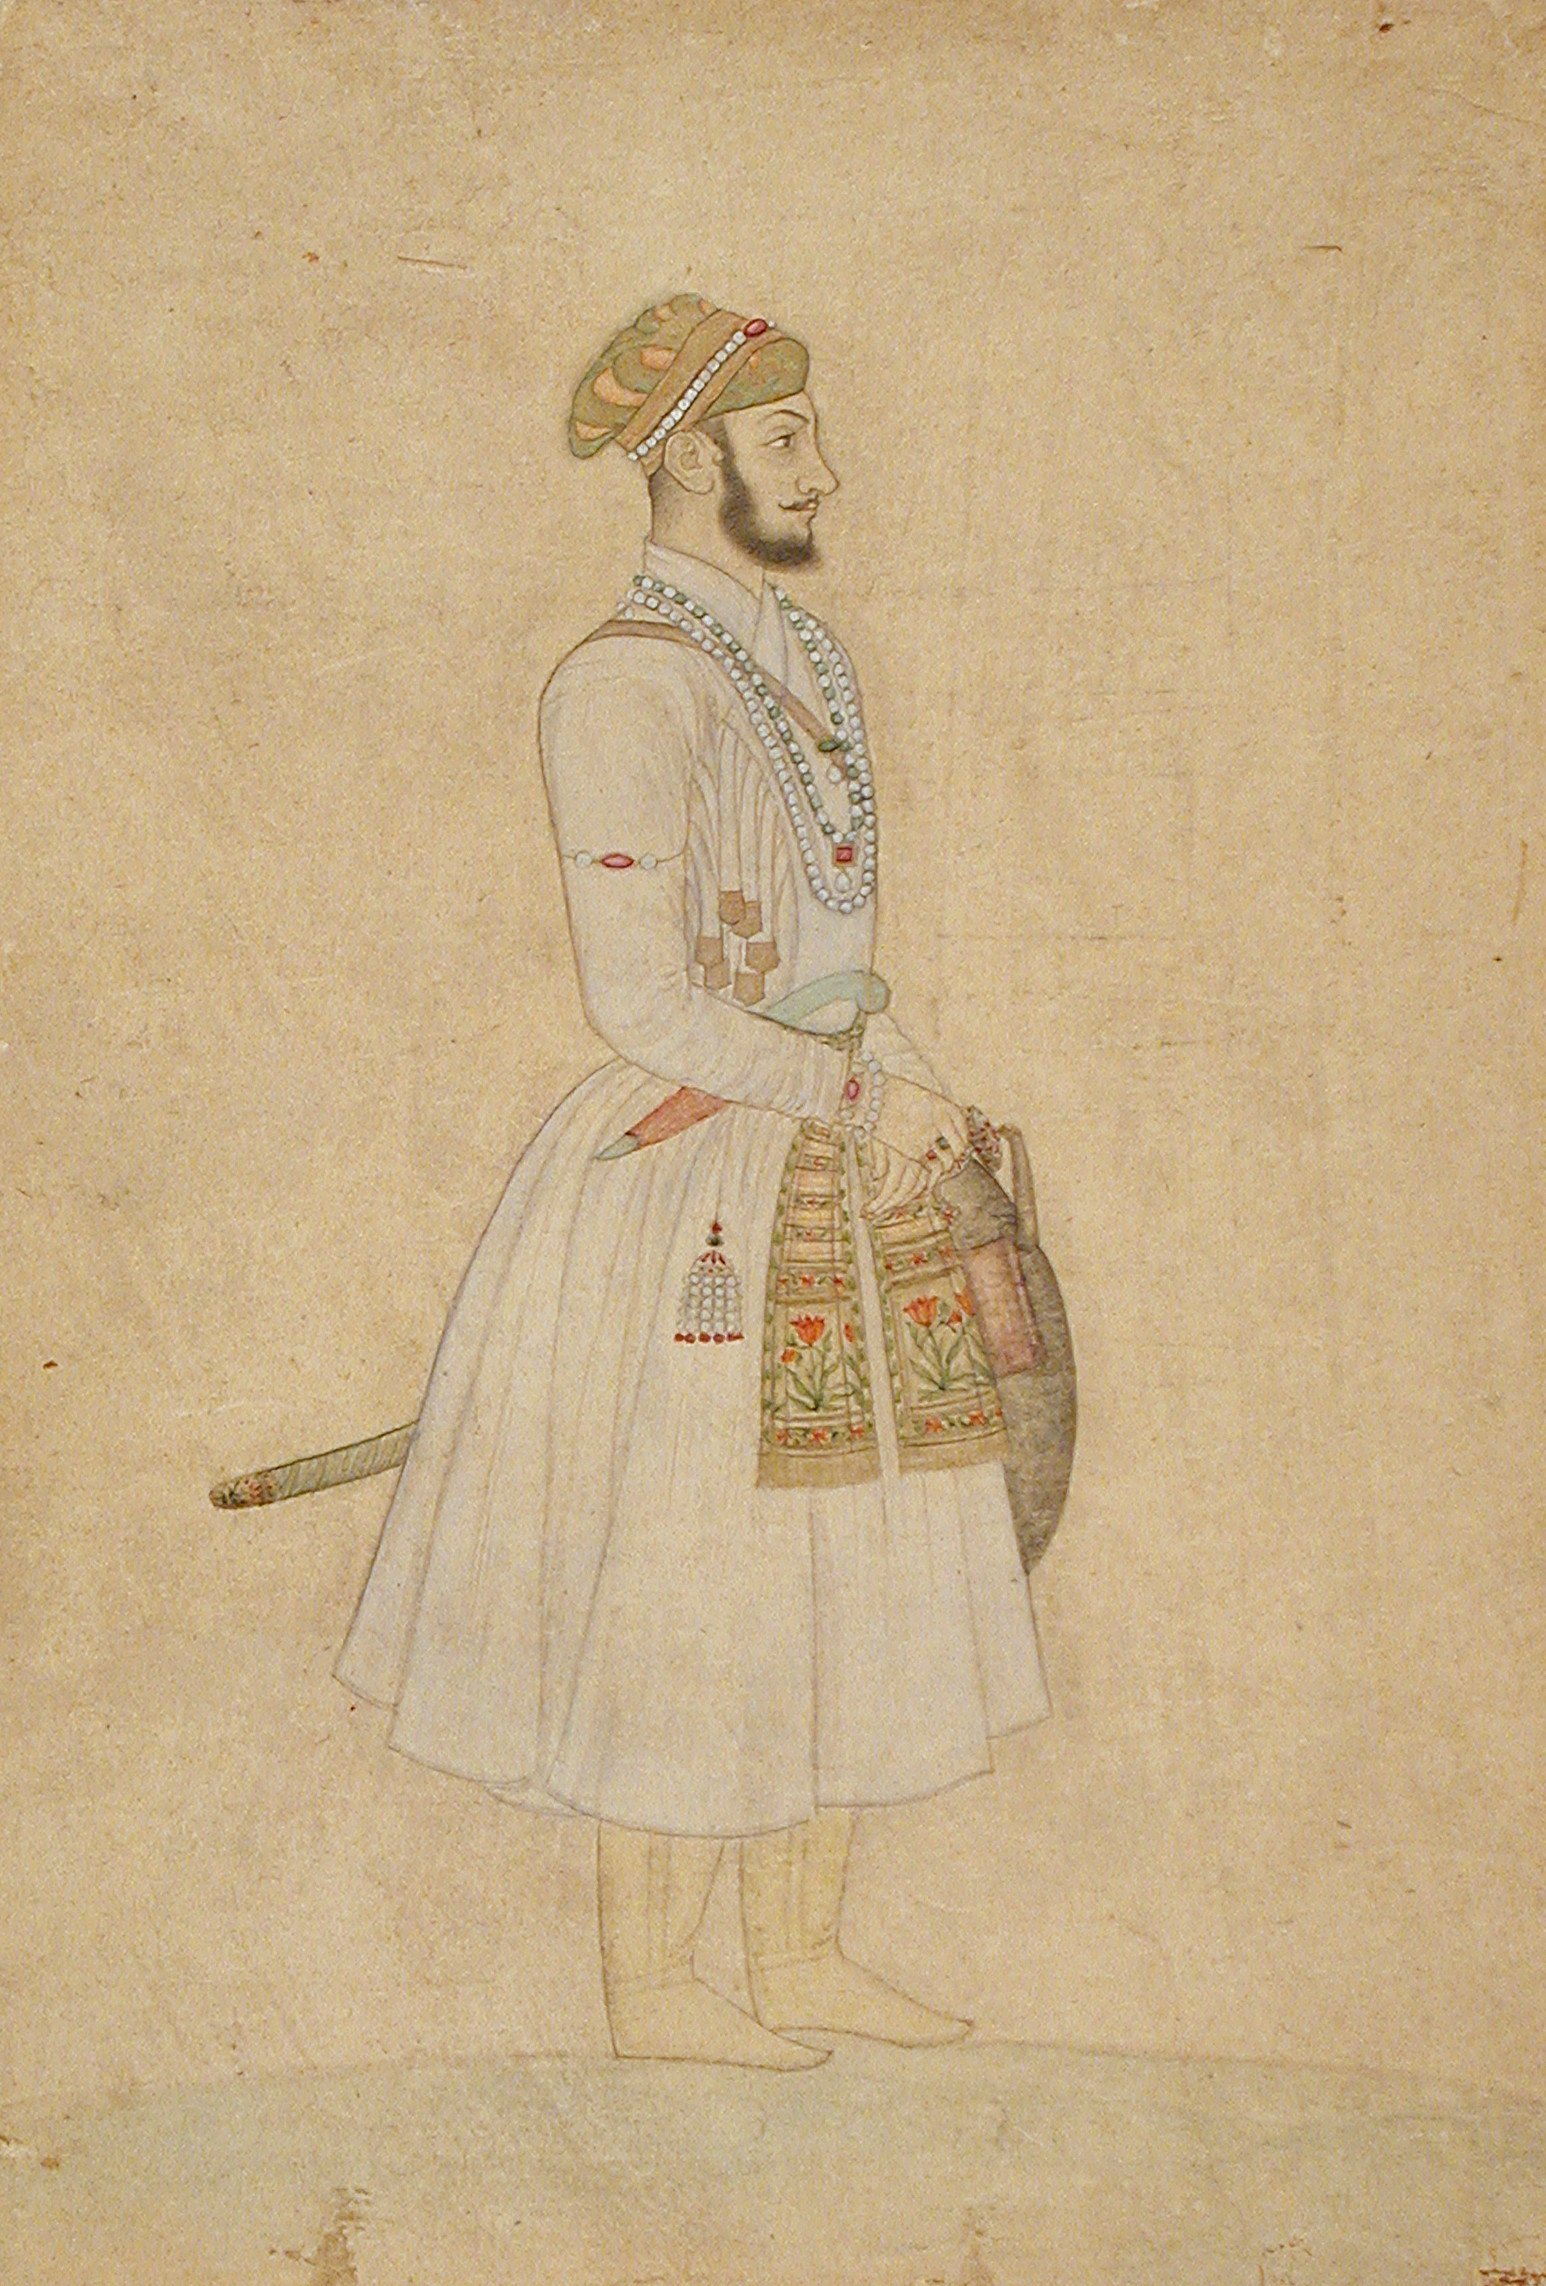 Mughal drawing from LACMA’s collection dating from about 1675 showing how a patka was worn